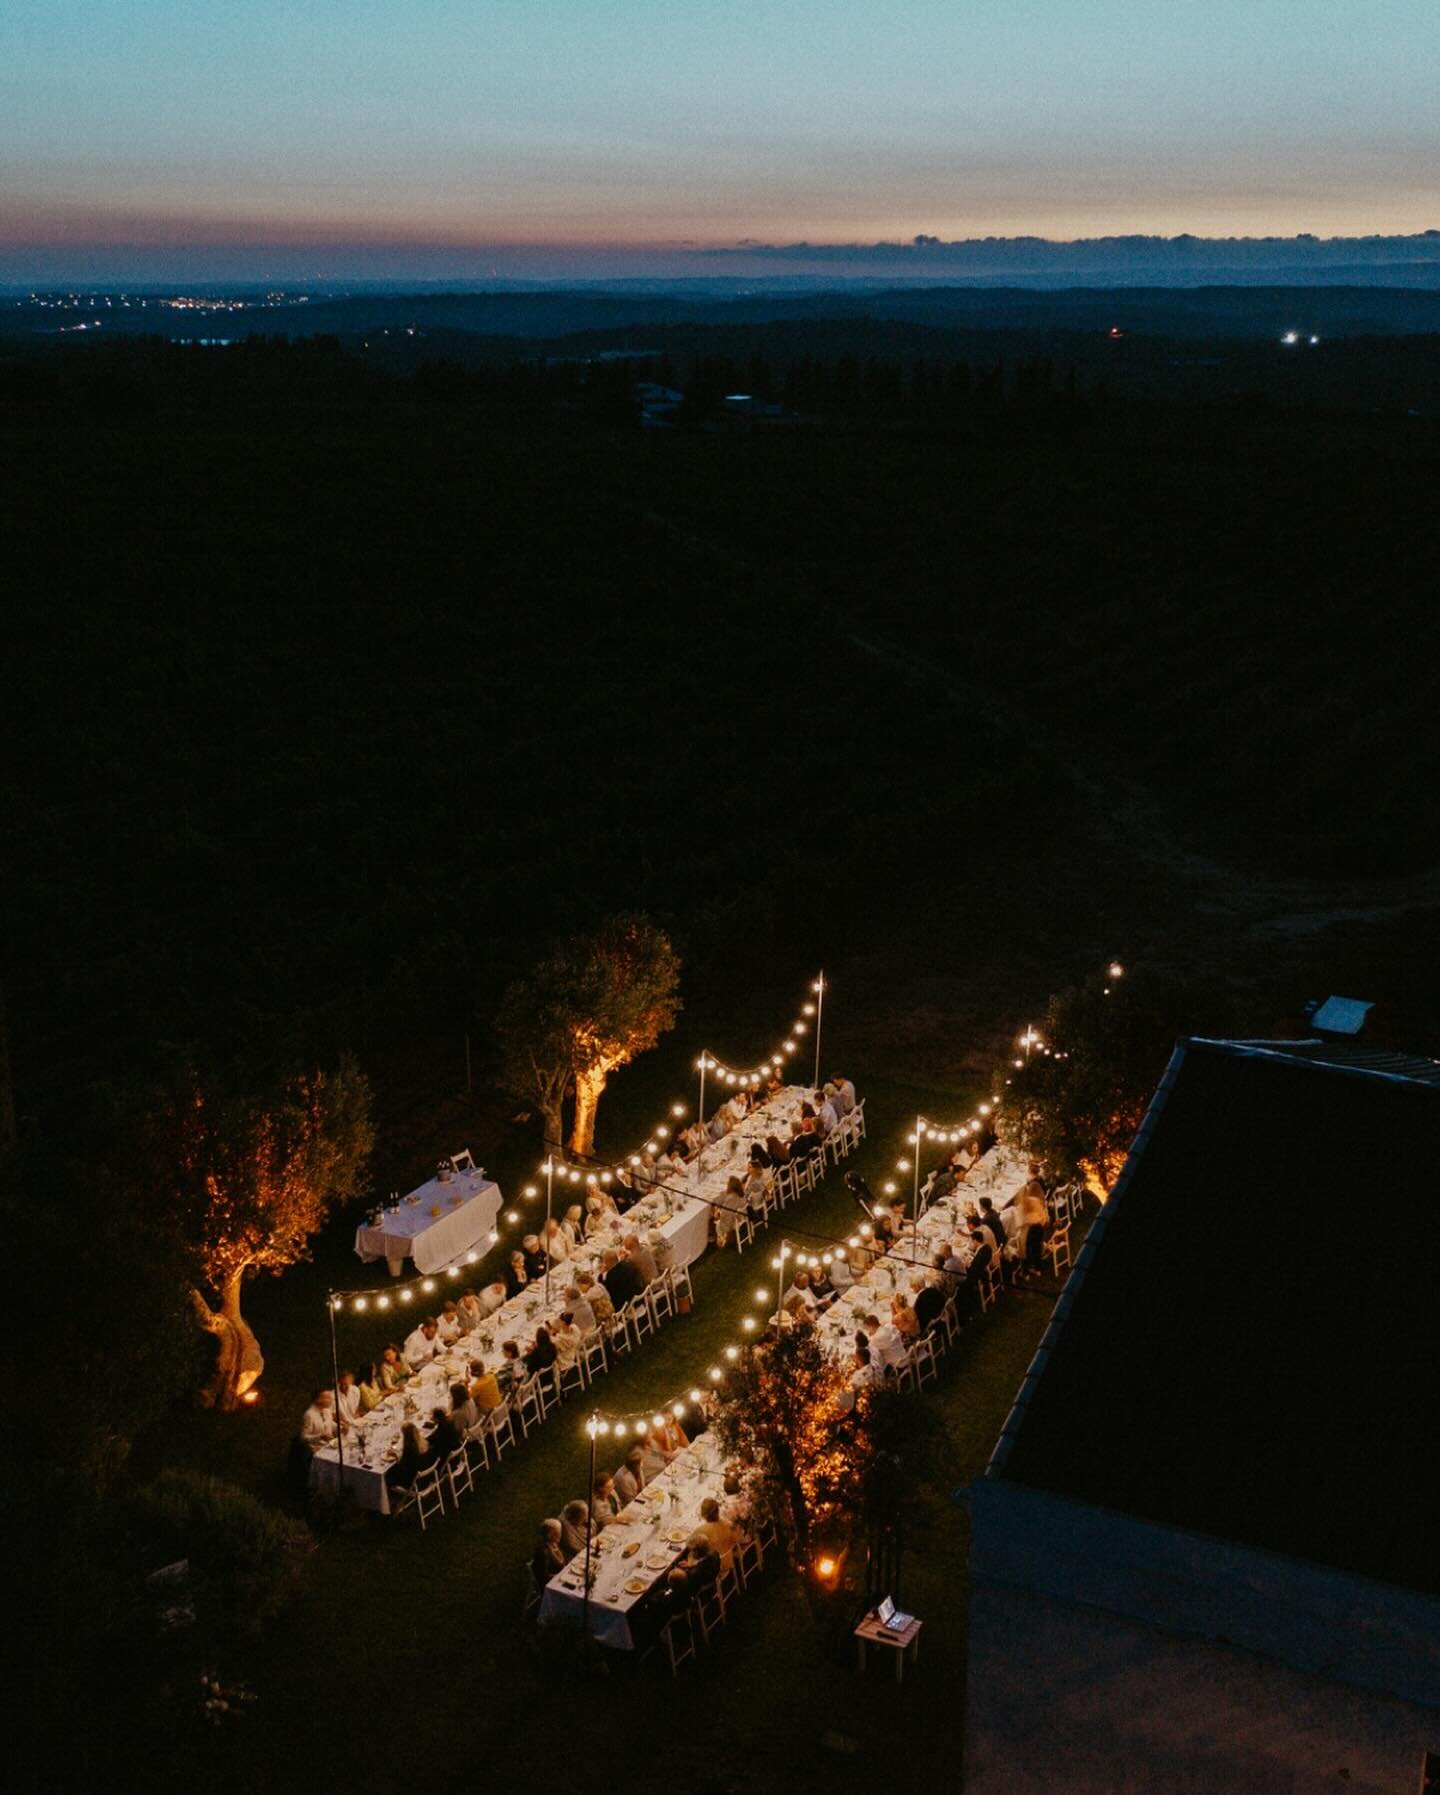 Missing those iconic warm summer nights in Algarve with a bottle of fresh white wine (especially from @morgadodoquintao ). The wedding of @nadiadottir &amp; @octavio_pires had one of the most beautiful sunsets in whole 2023. 
Wedding designed by the 